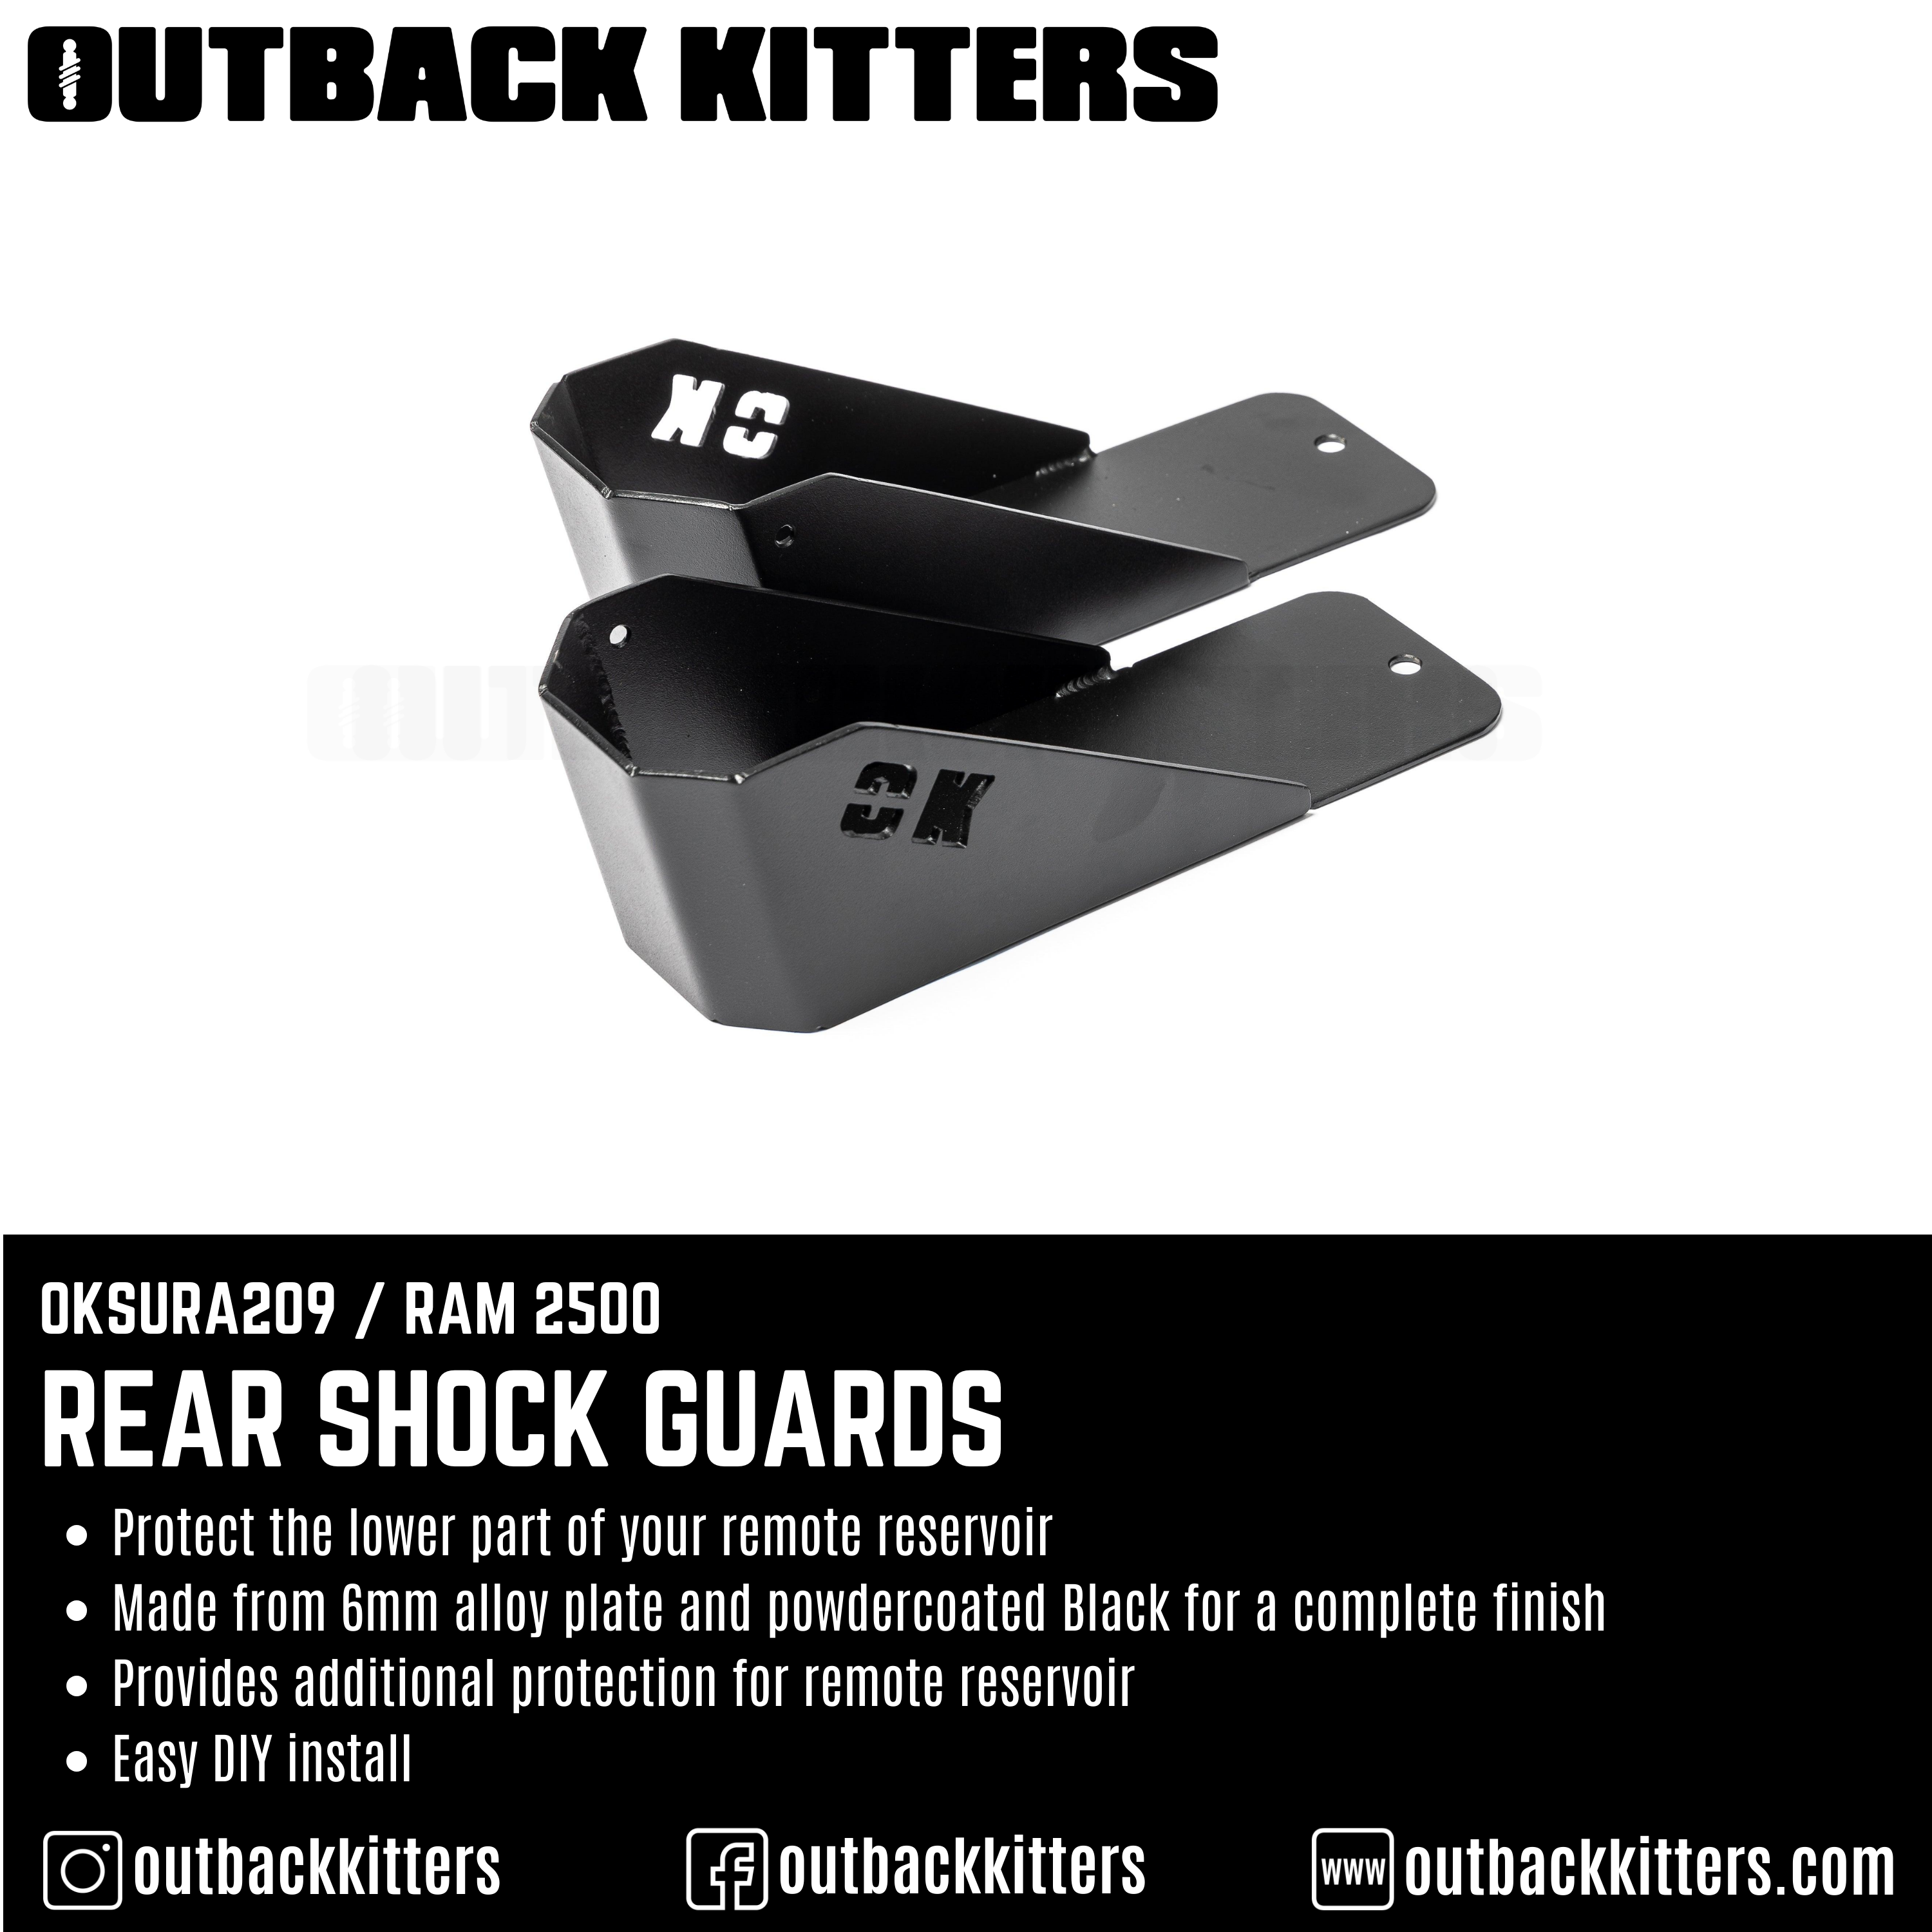 Ram 2500 Outback Kitters Rear Shock Guards - Outback Kitters